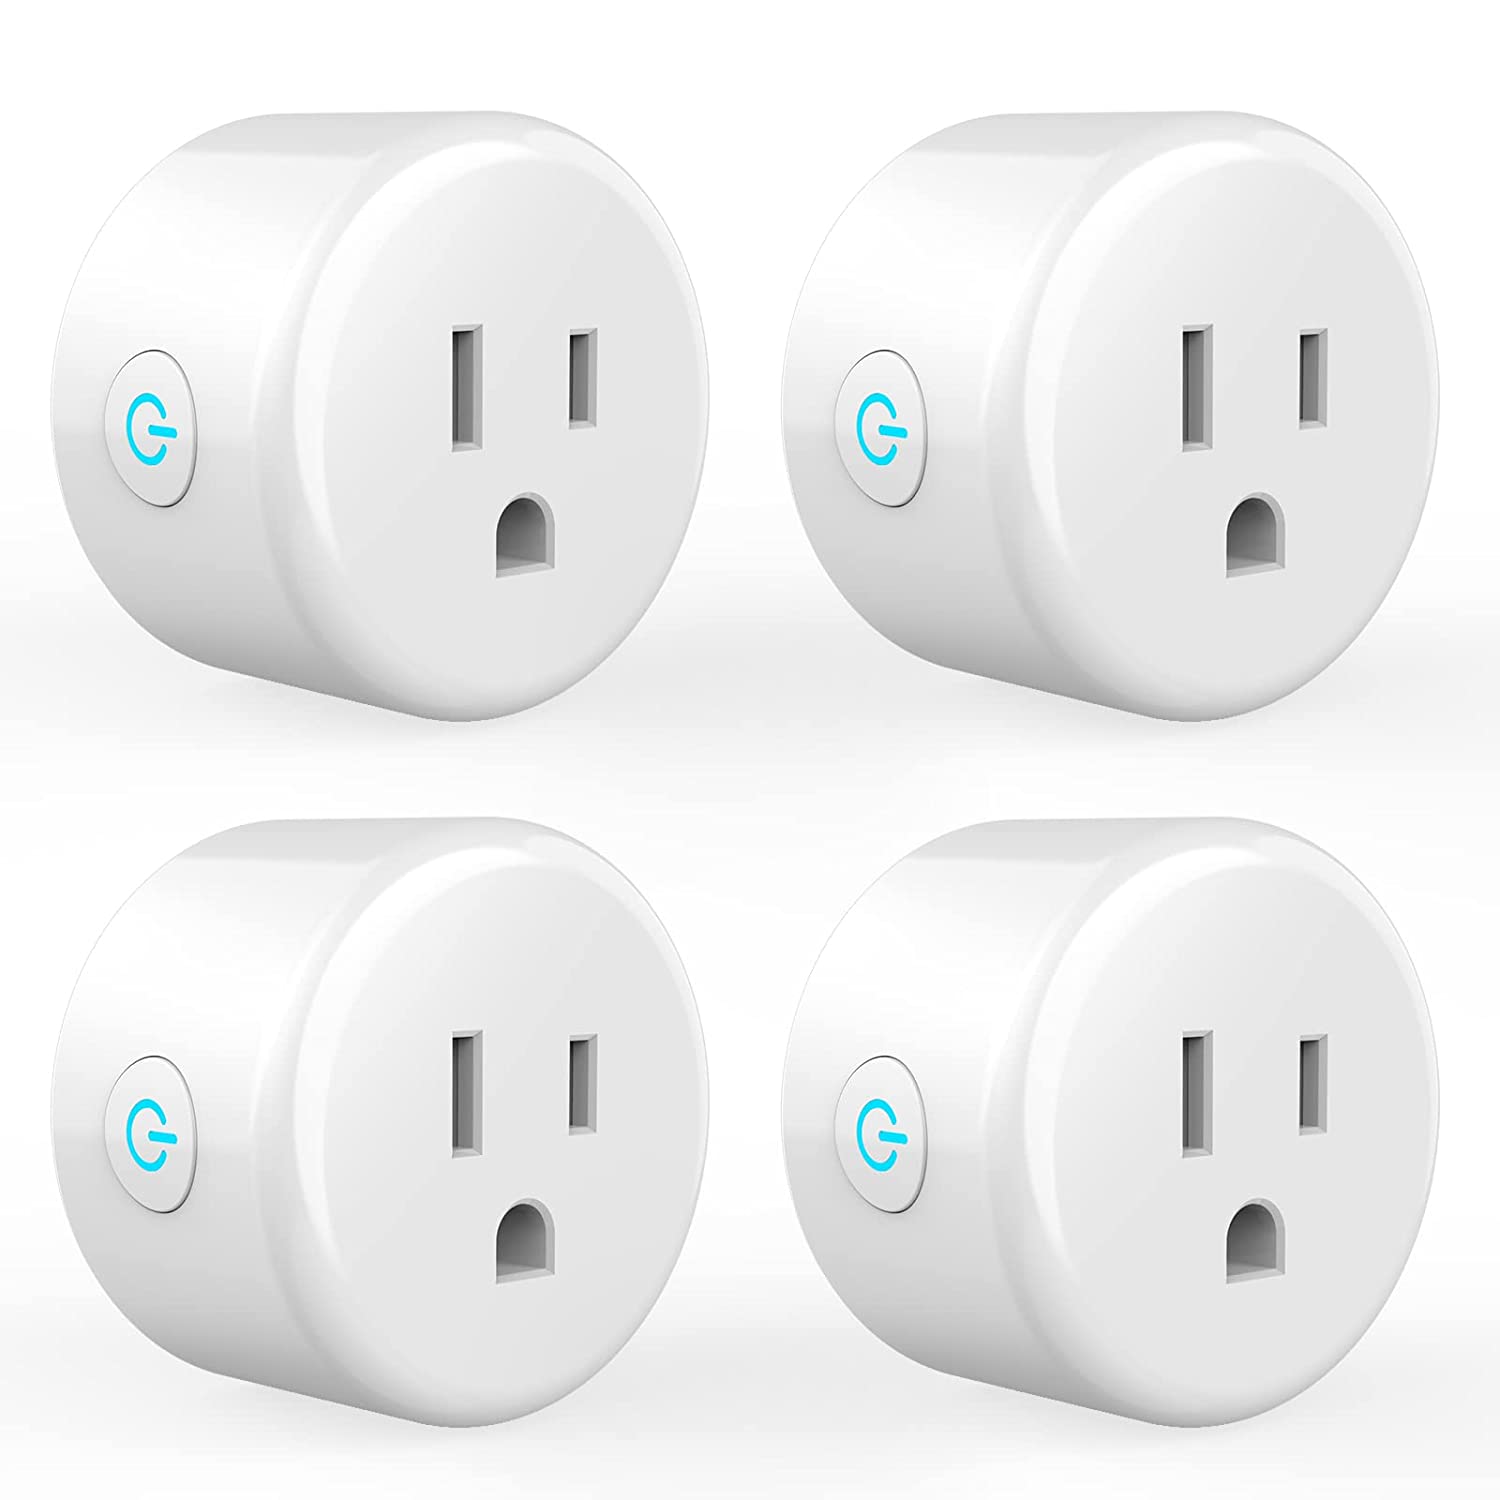 GHome Smart Mini Plug Compatible with Alexa and Google Home, WiFi Outlet Socket Remote Control with Timer Function, Only Supports 2.4GHz Network, No Hub Required, ETL FCC Listed (1 Pack), White